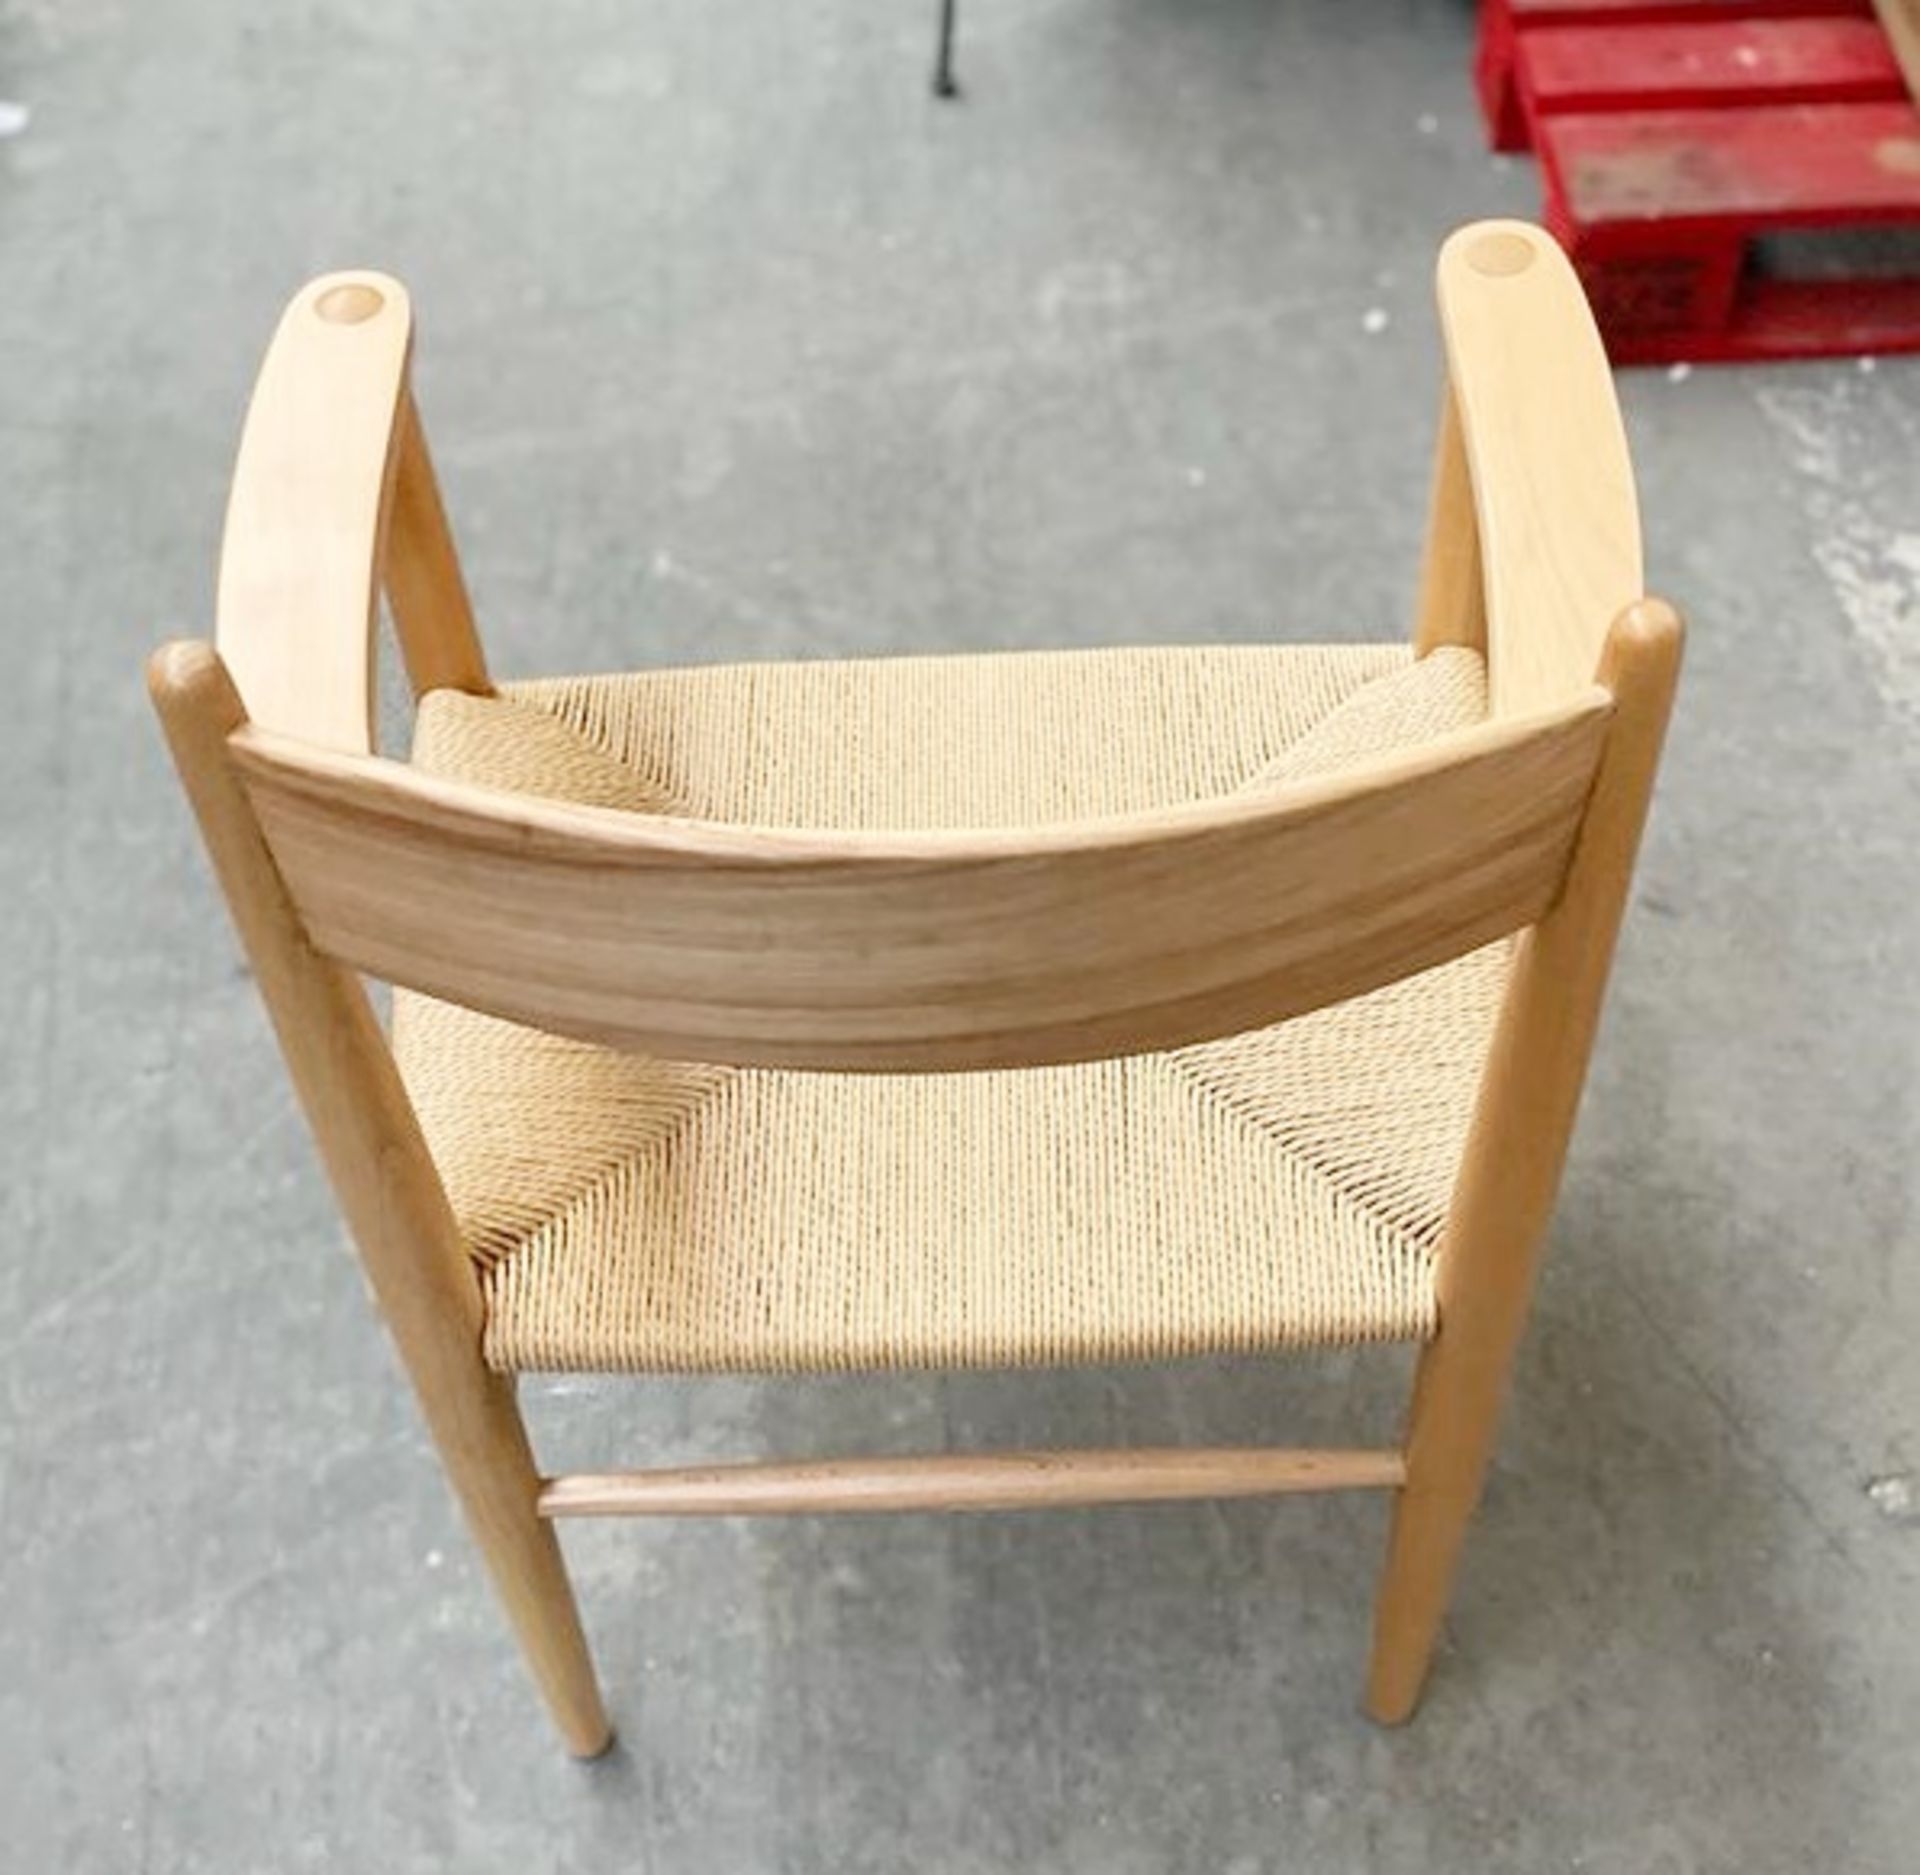 1 x Nielsen Natural + Natural Cord Chair With Arm Rests - Dimensions: 50(h) x 48(d) x 58(w) cm - - Image 2 of 4